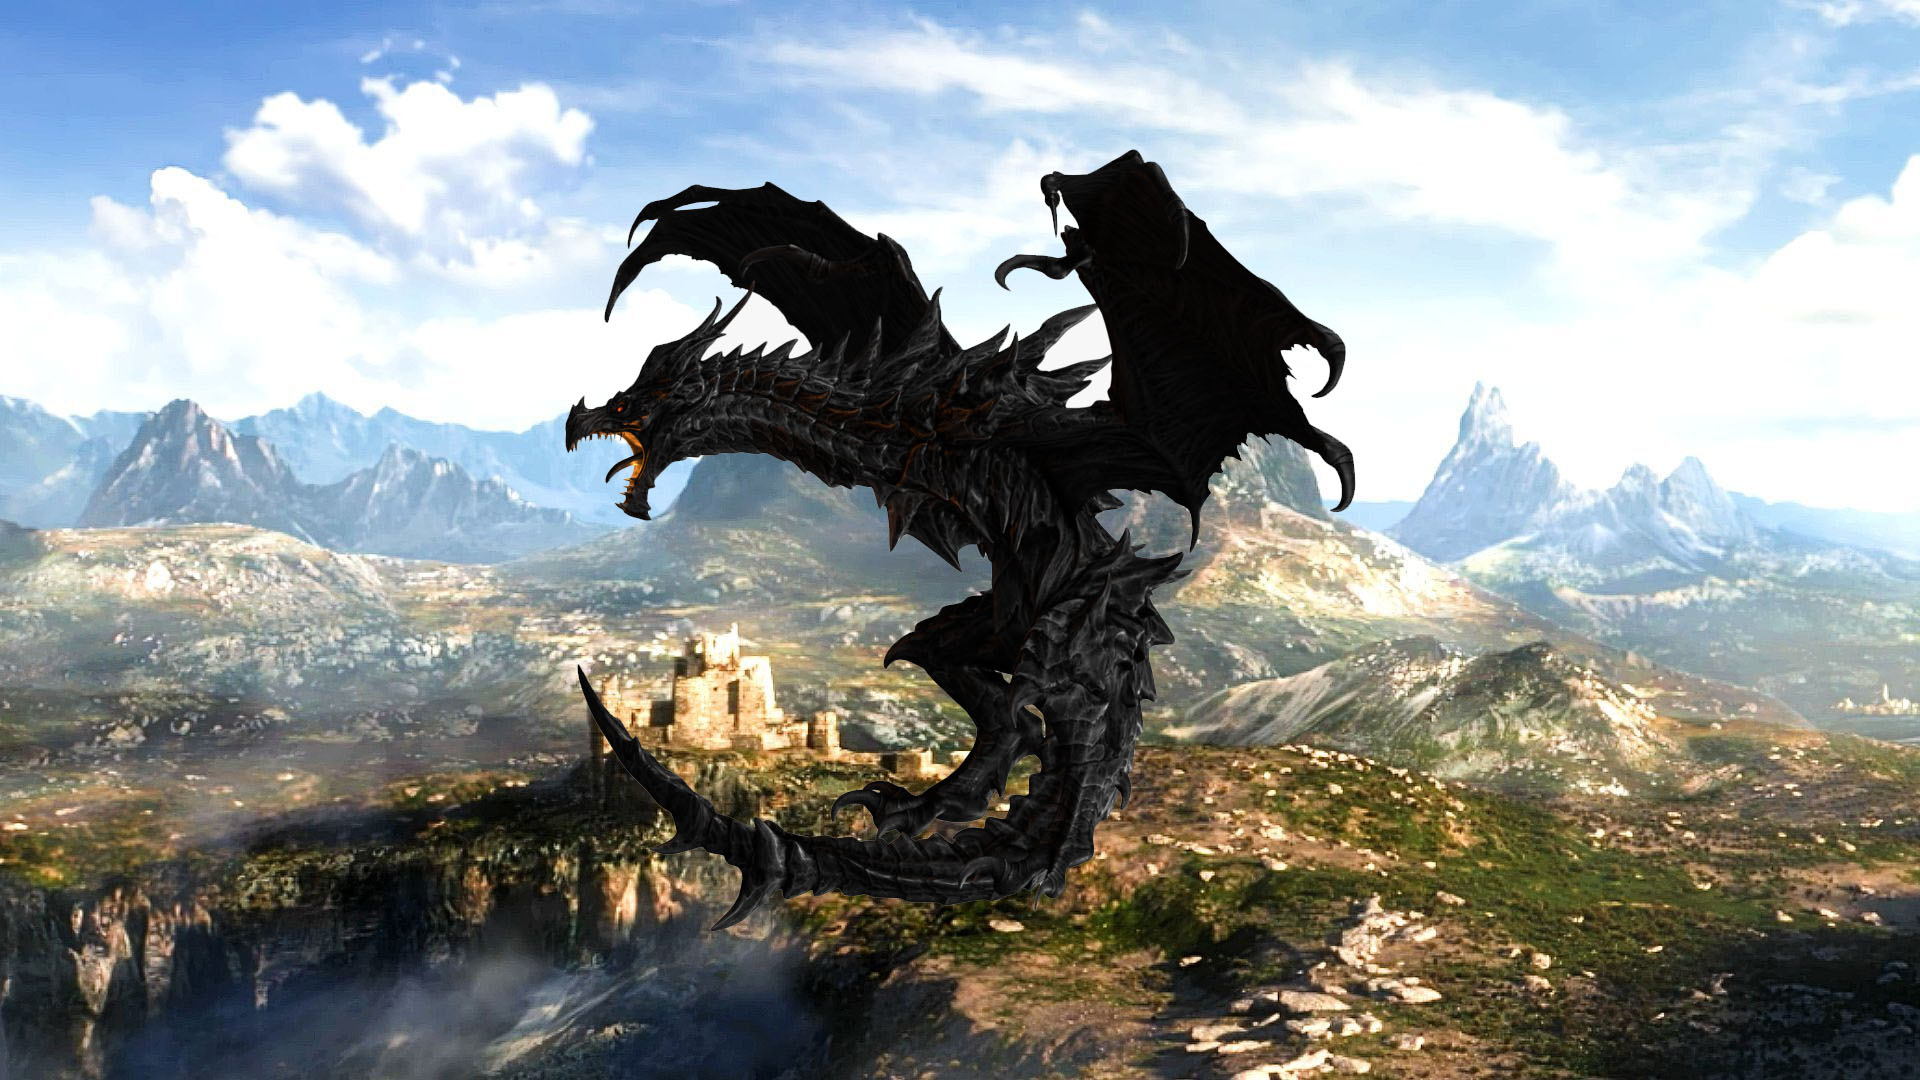 The Elder Scrolls 6 Is Finally In Pre-Production, Confirms Bethesda